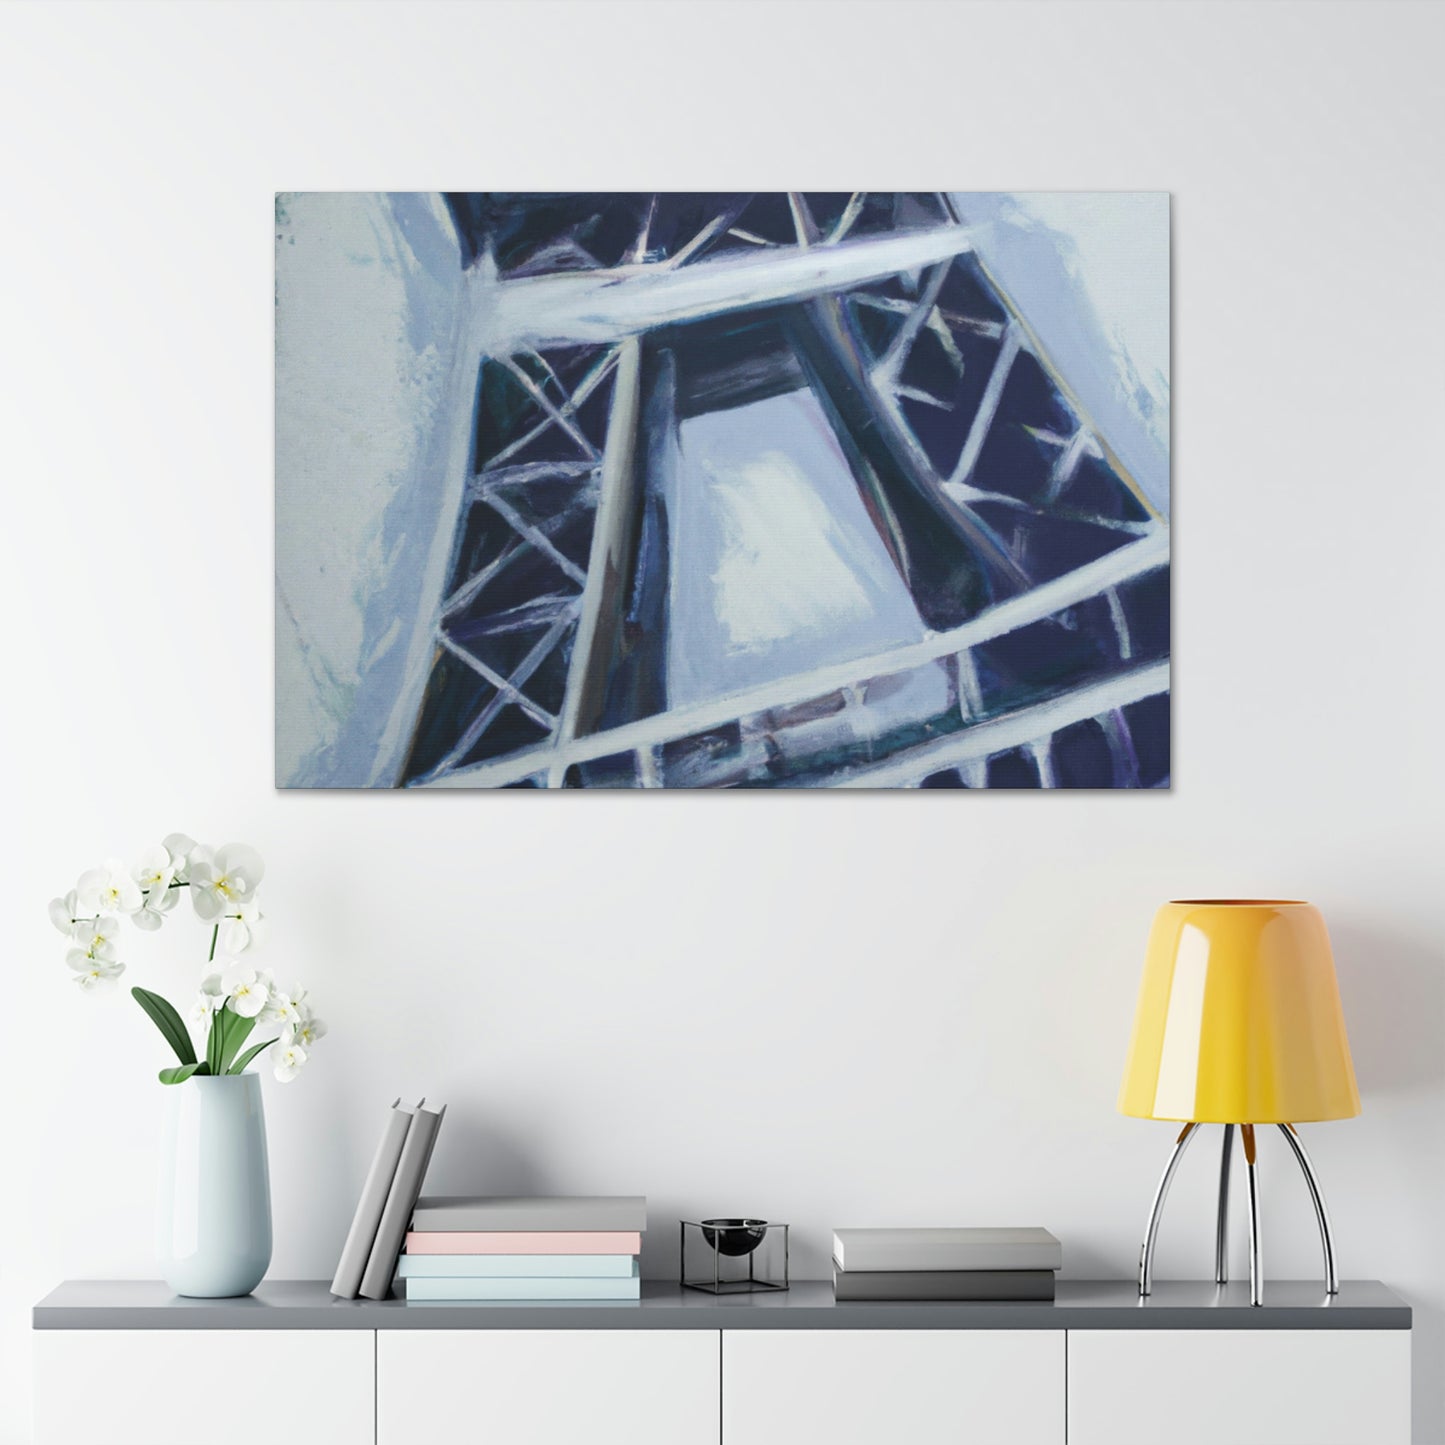 Jacques LeChat - Eiffel Tower Canvas Wall Art